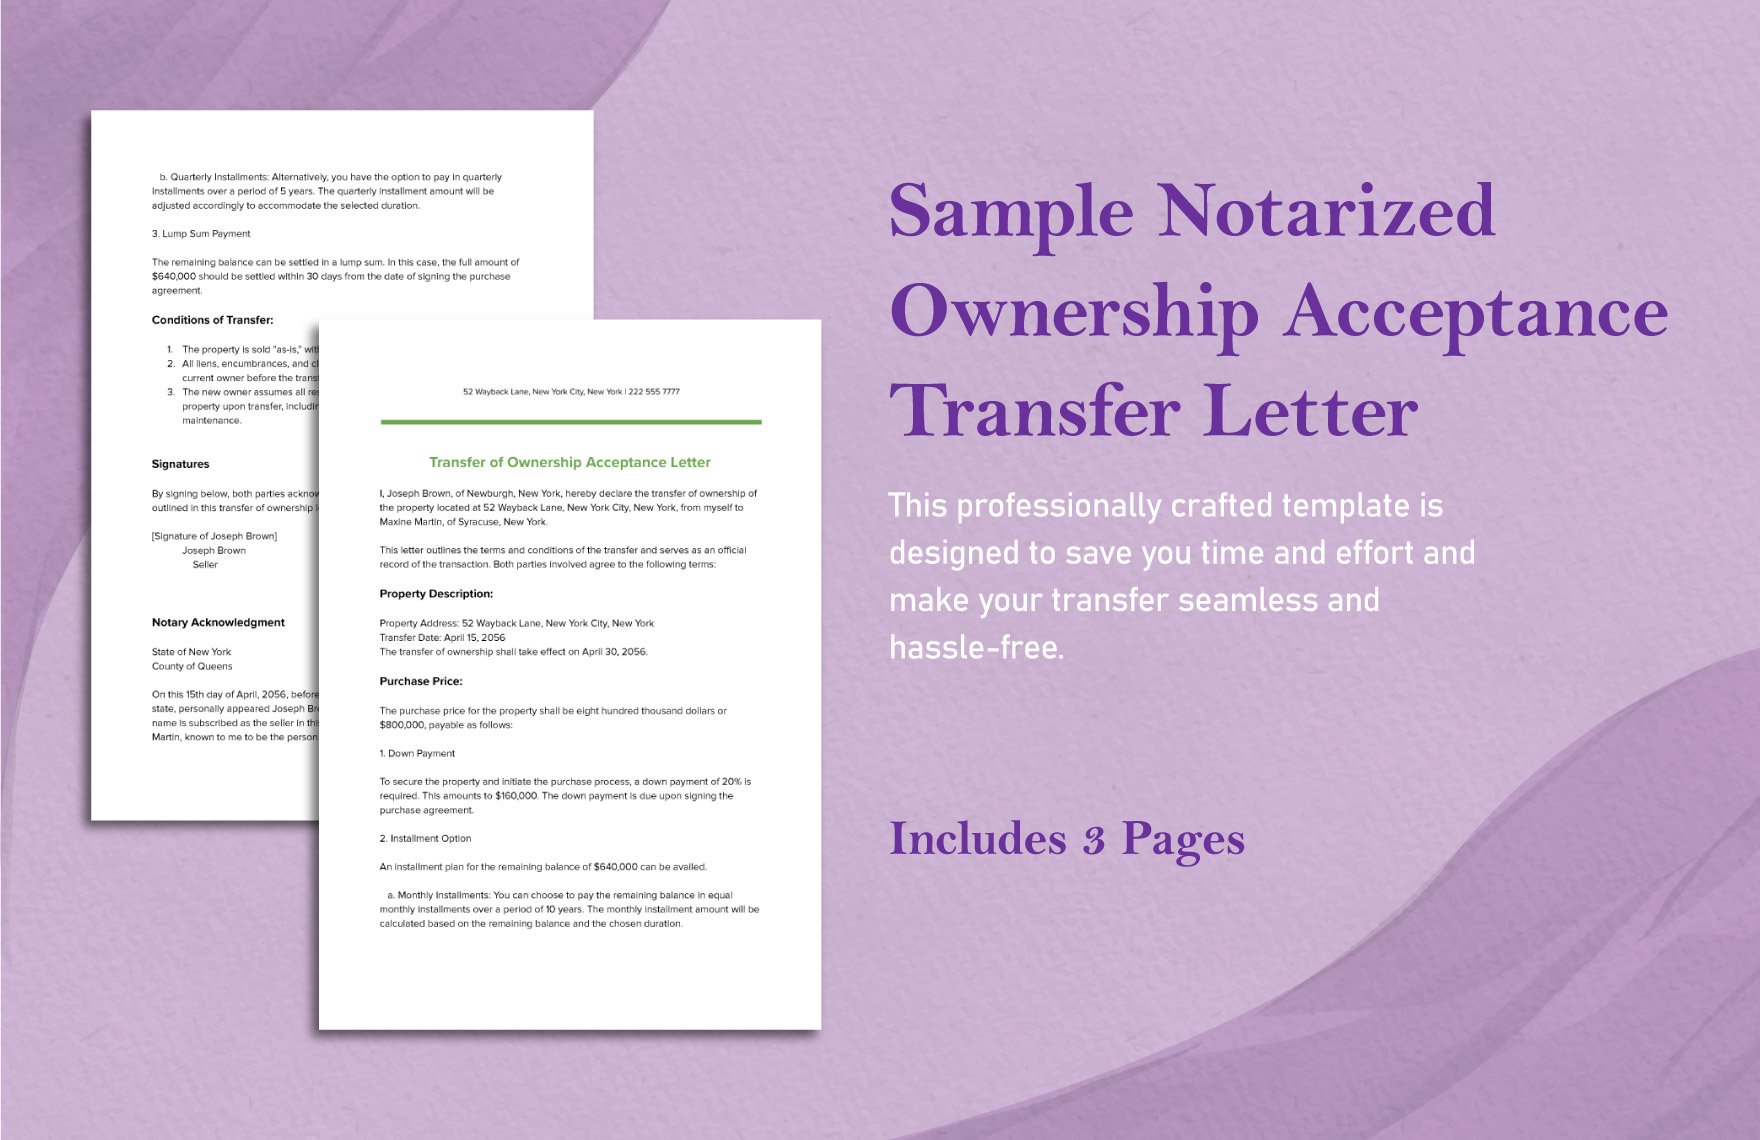 sample-notarized-ownership-acceptance-transfer-letter